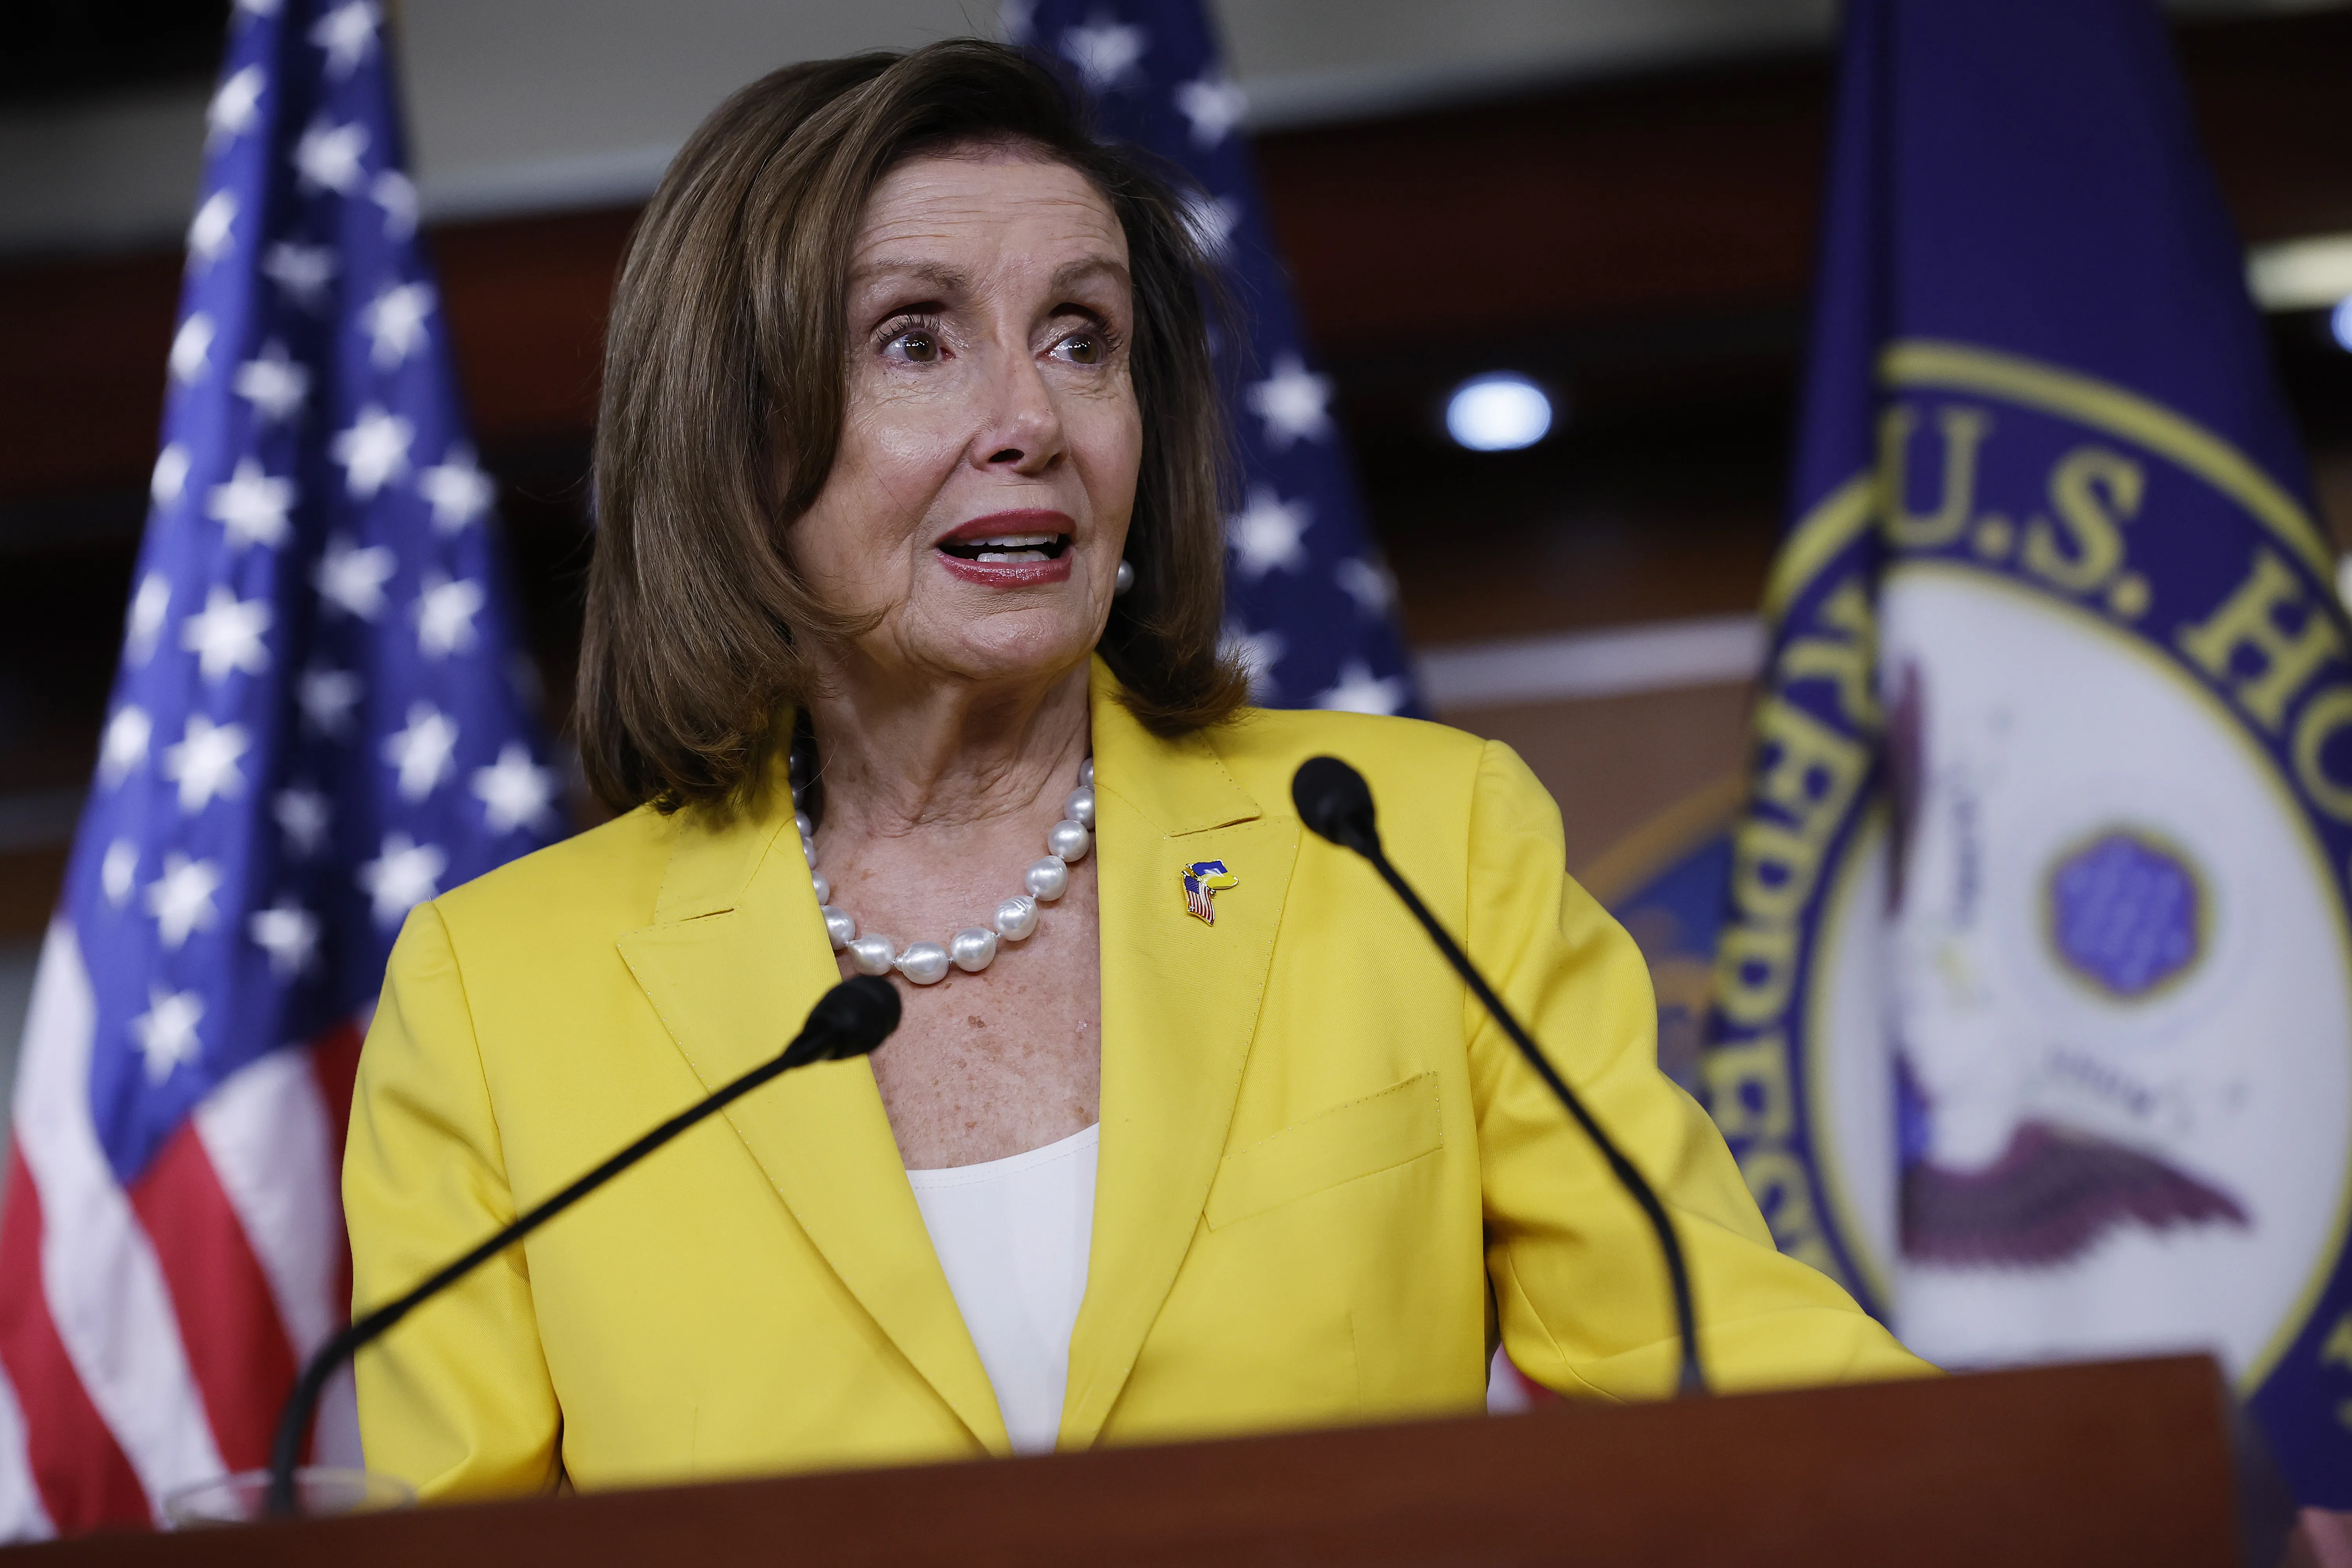 Speaker of the House Nancy Pelosi (D-CA) talks to reporters during her weekly news conference in the U.S. Capitol Visitors Center on June 16, 2022 in Washington, D.C.?w=200&h=150